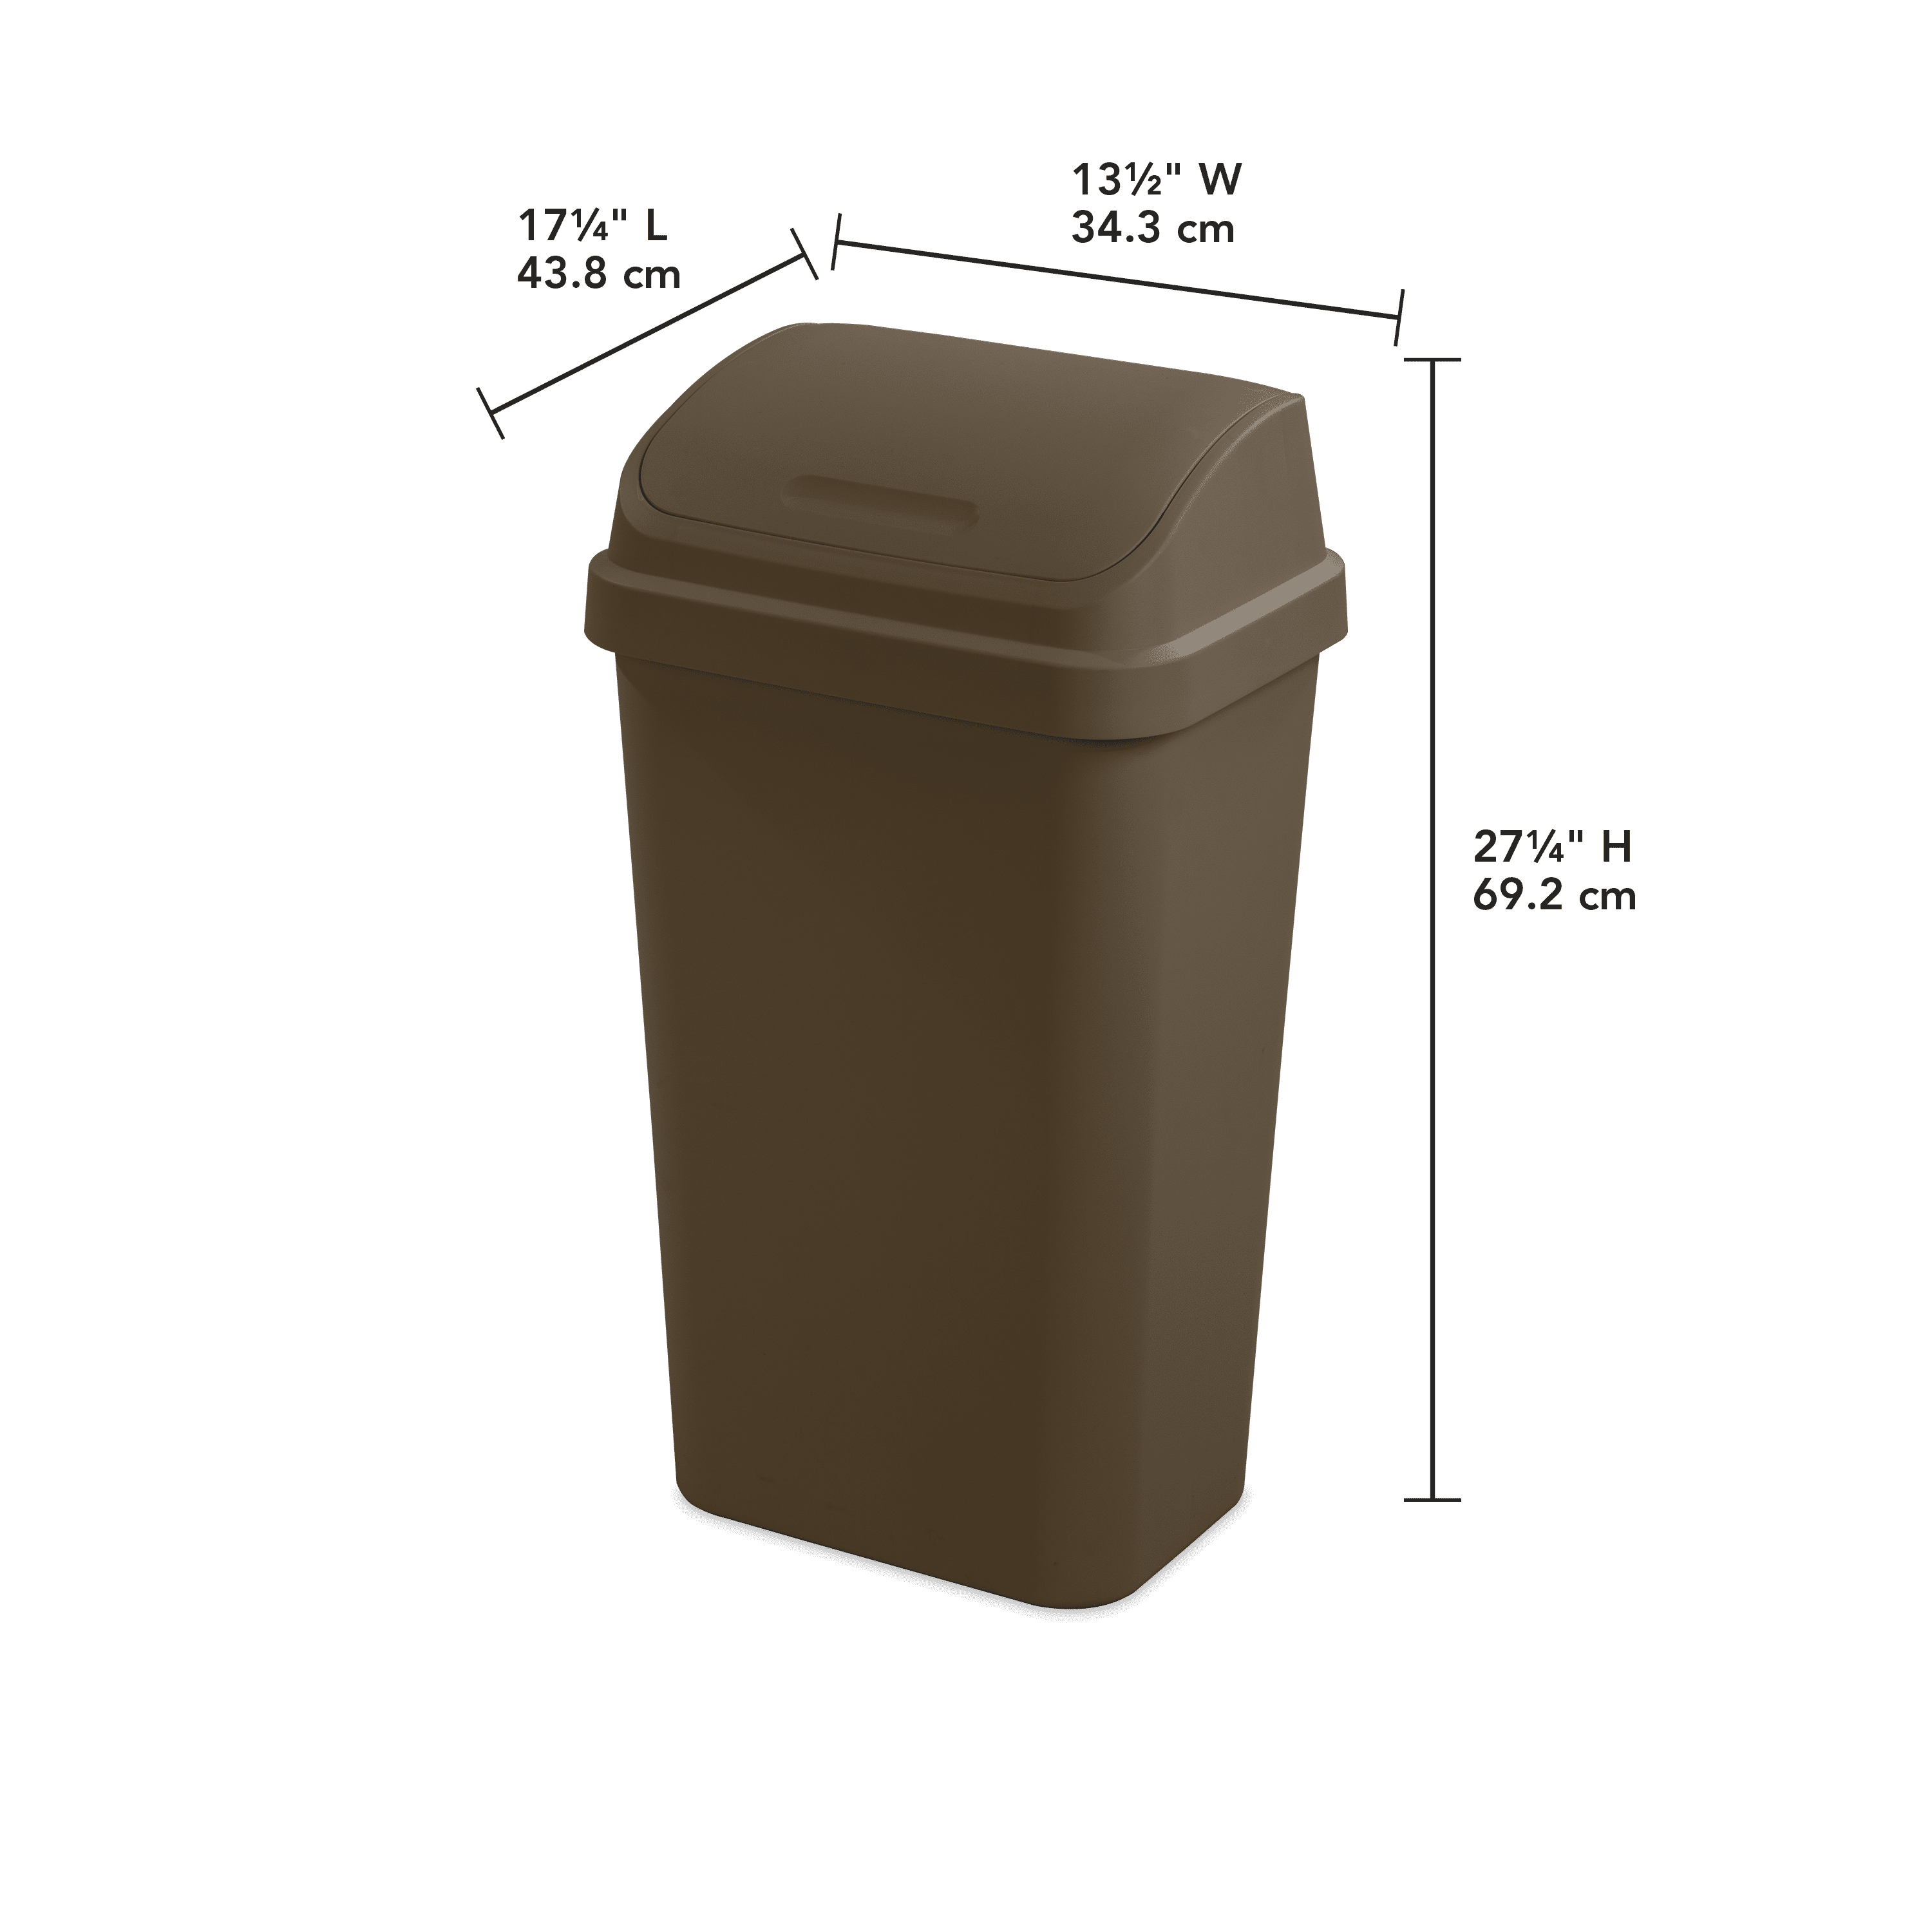  Superio Kitchen Trash Can 13 Gallon with Swing Lid, Plastic  Tall Garbage Can Outdoor and Indoor, Large 52 Qt Recycle Bin and Waste  Basket for Home, Office, Garage, Patio, Restaurant (Beige) 